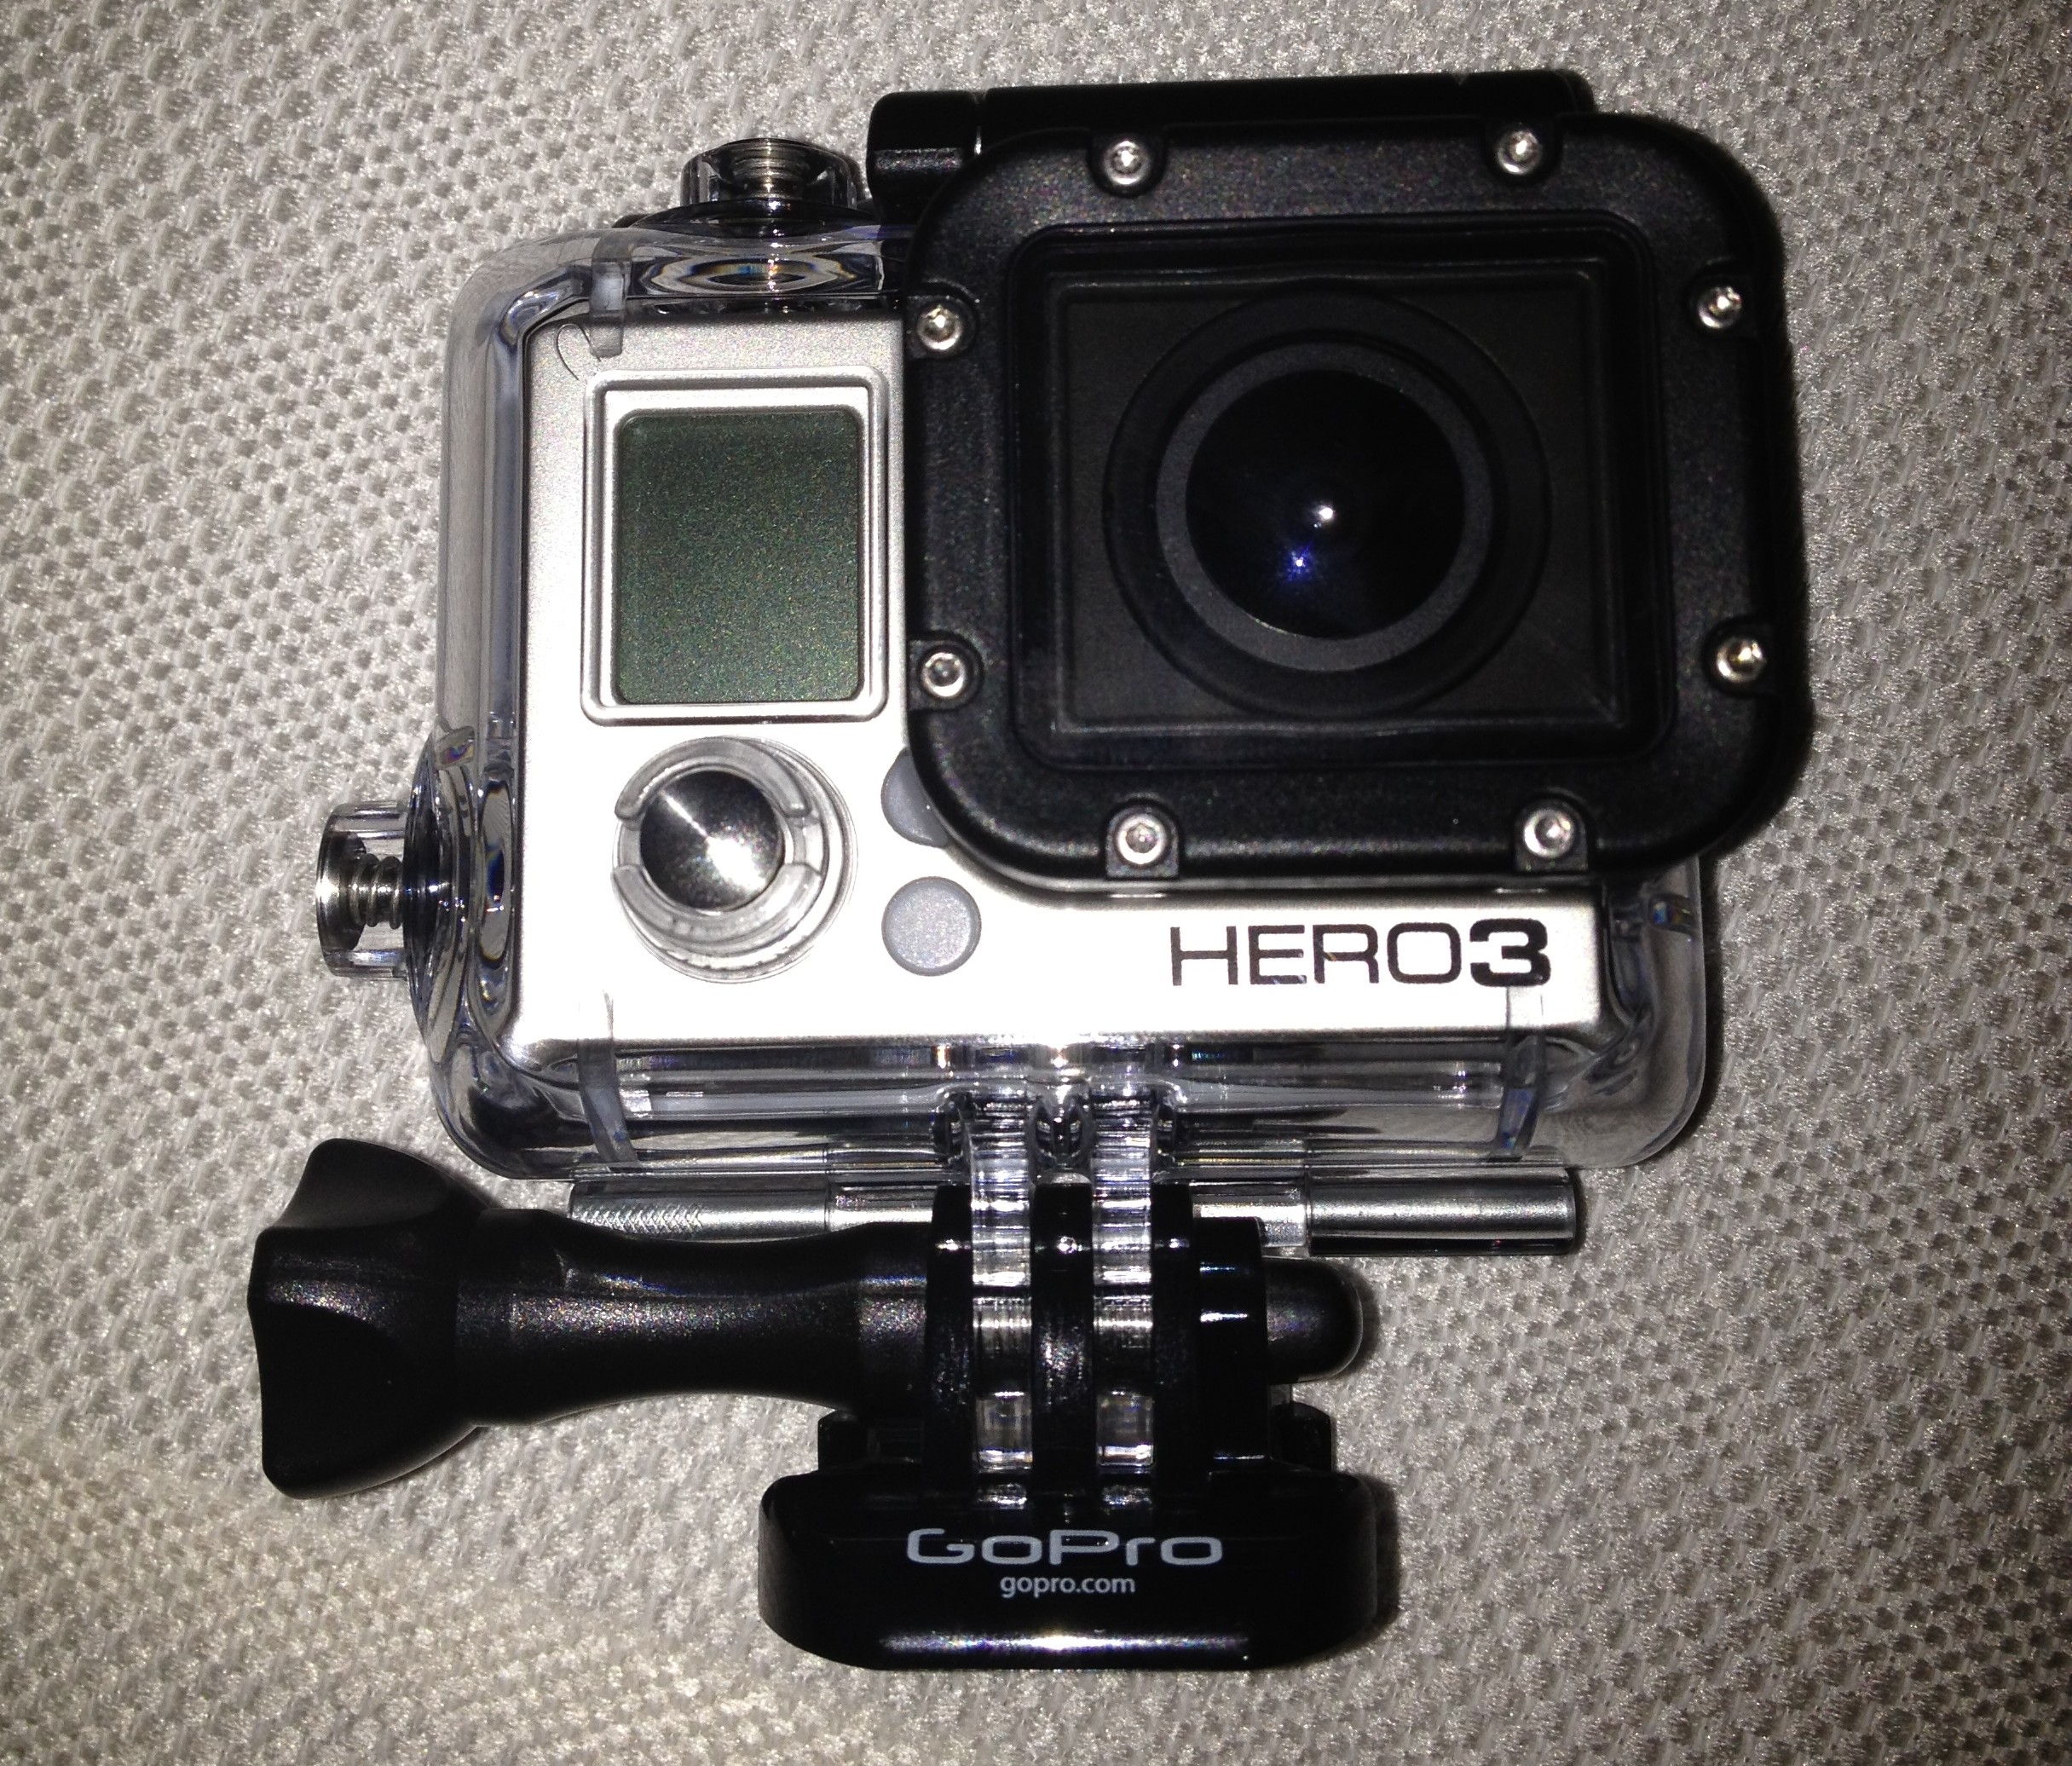 GoPro Hero 3 Goes To 11, and Shoots in 4K